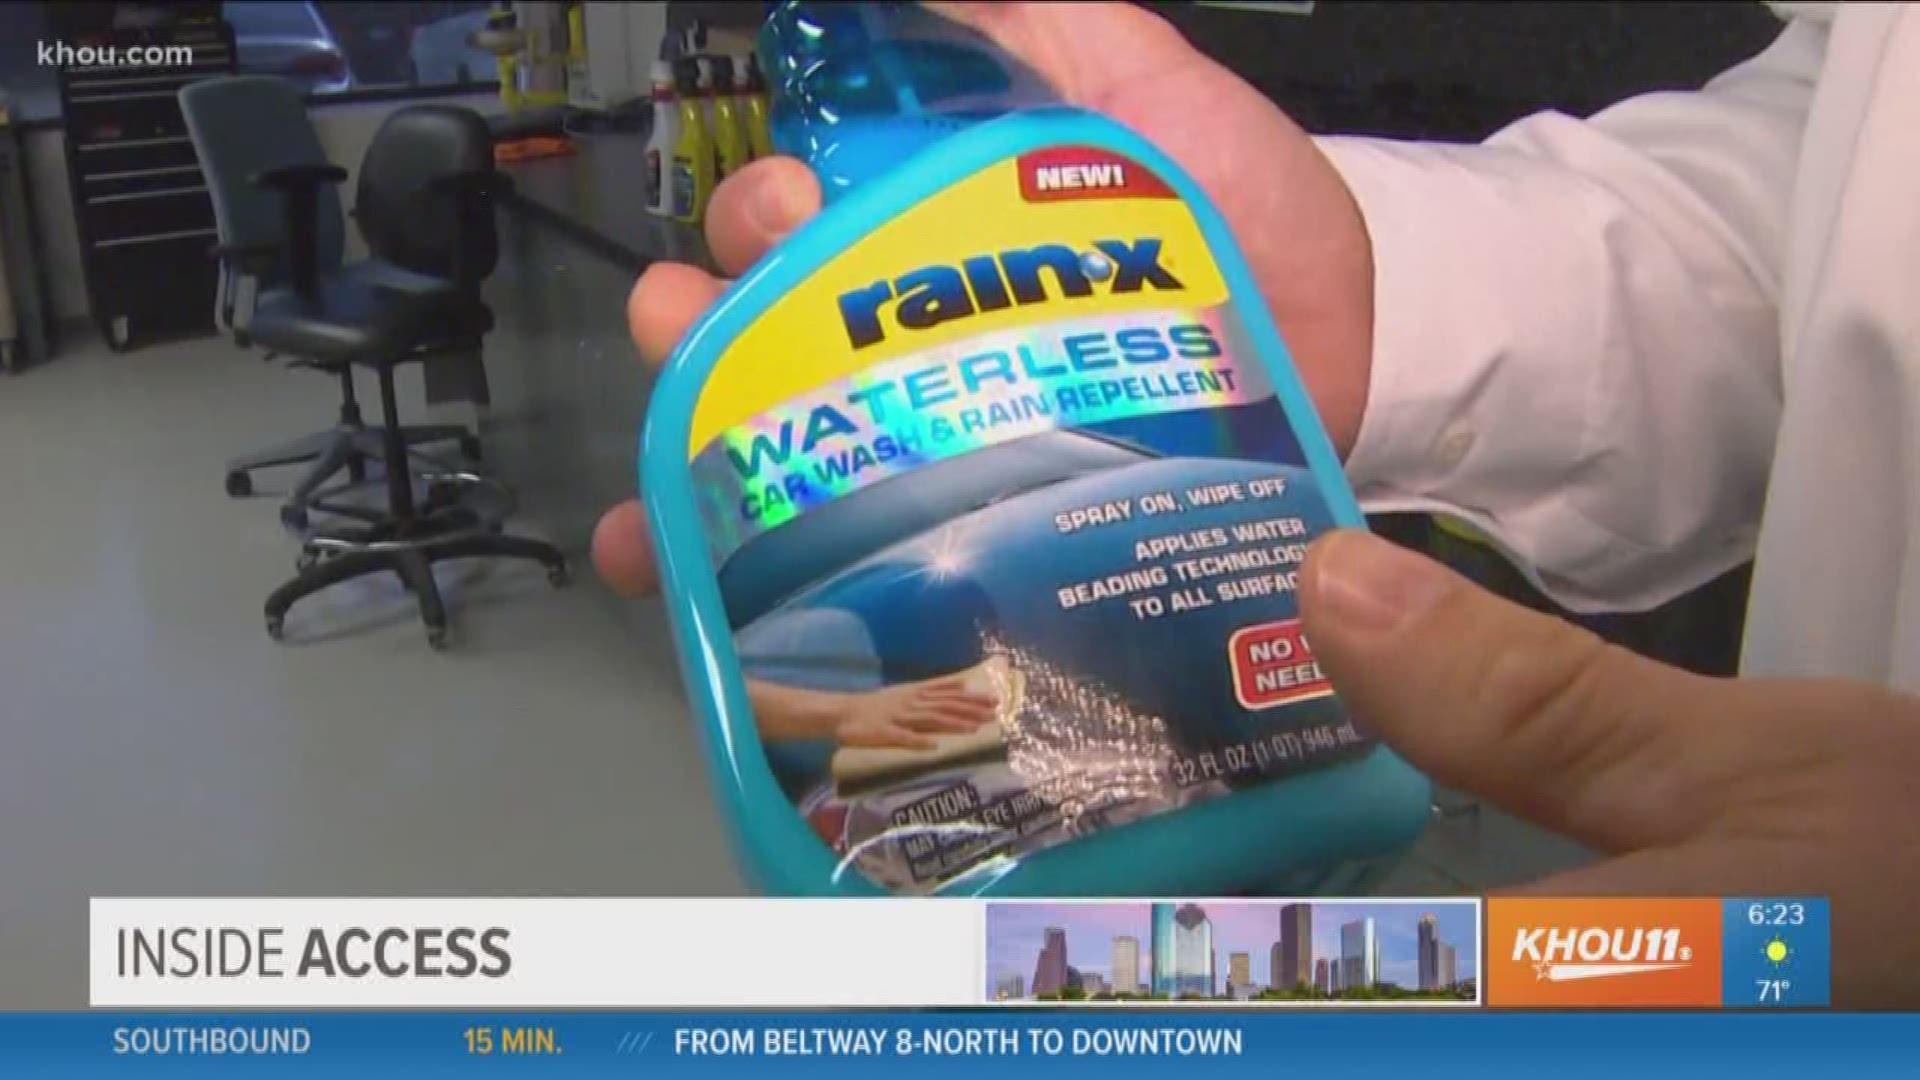 On Thursday, we have Inside Access to ITW Global Brands. You may not recognize that name but you probably recognize the name of the most popular product they make. They make Rain-X - the stuff that makes water bead and roll right off your car and windshie